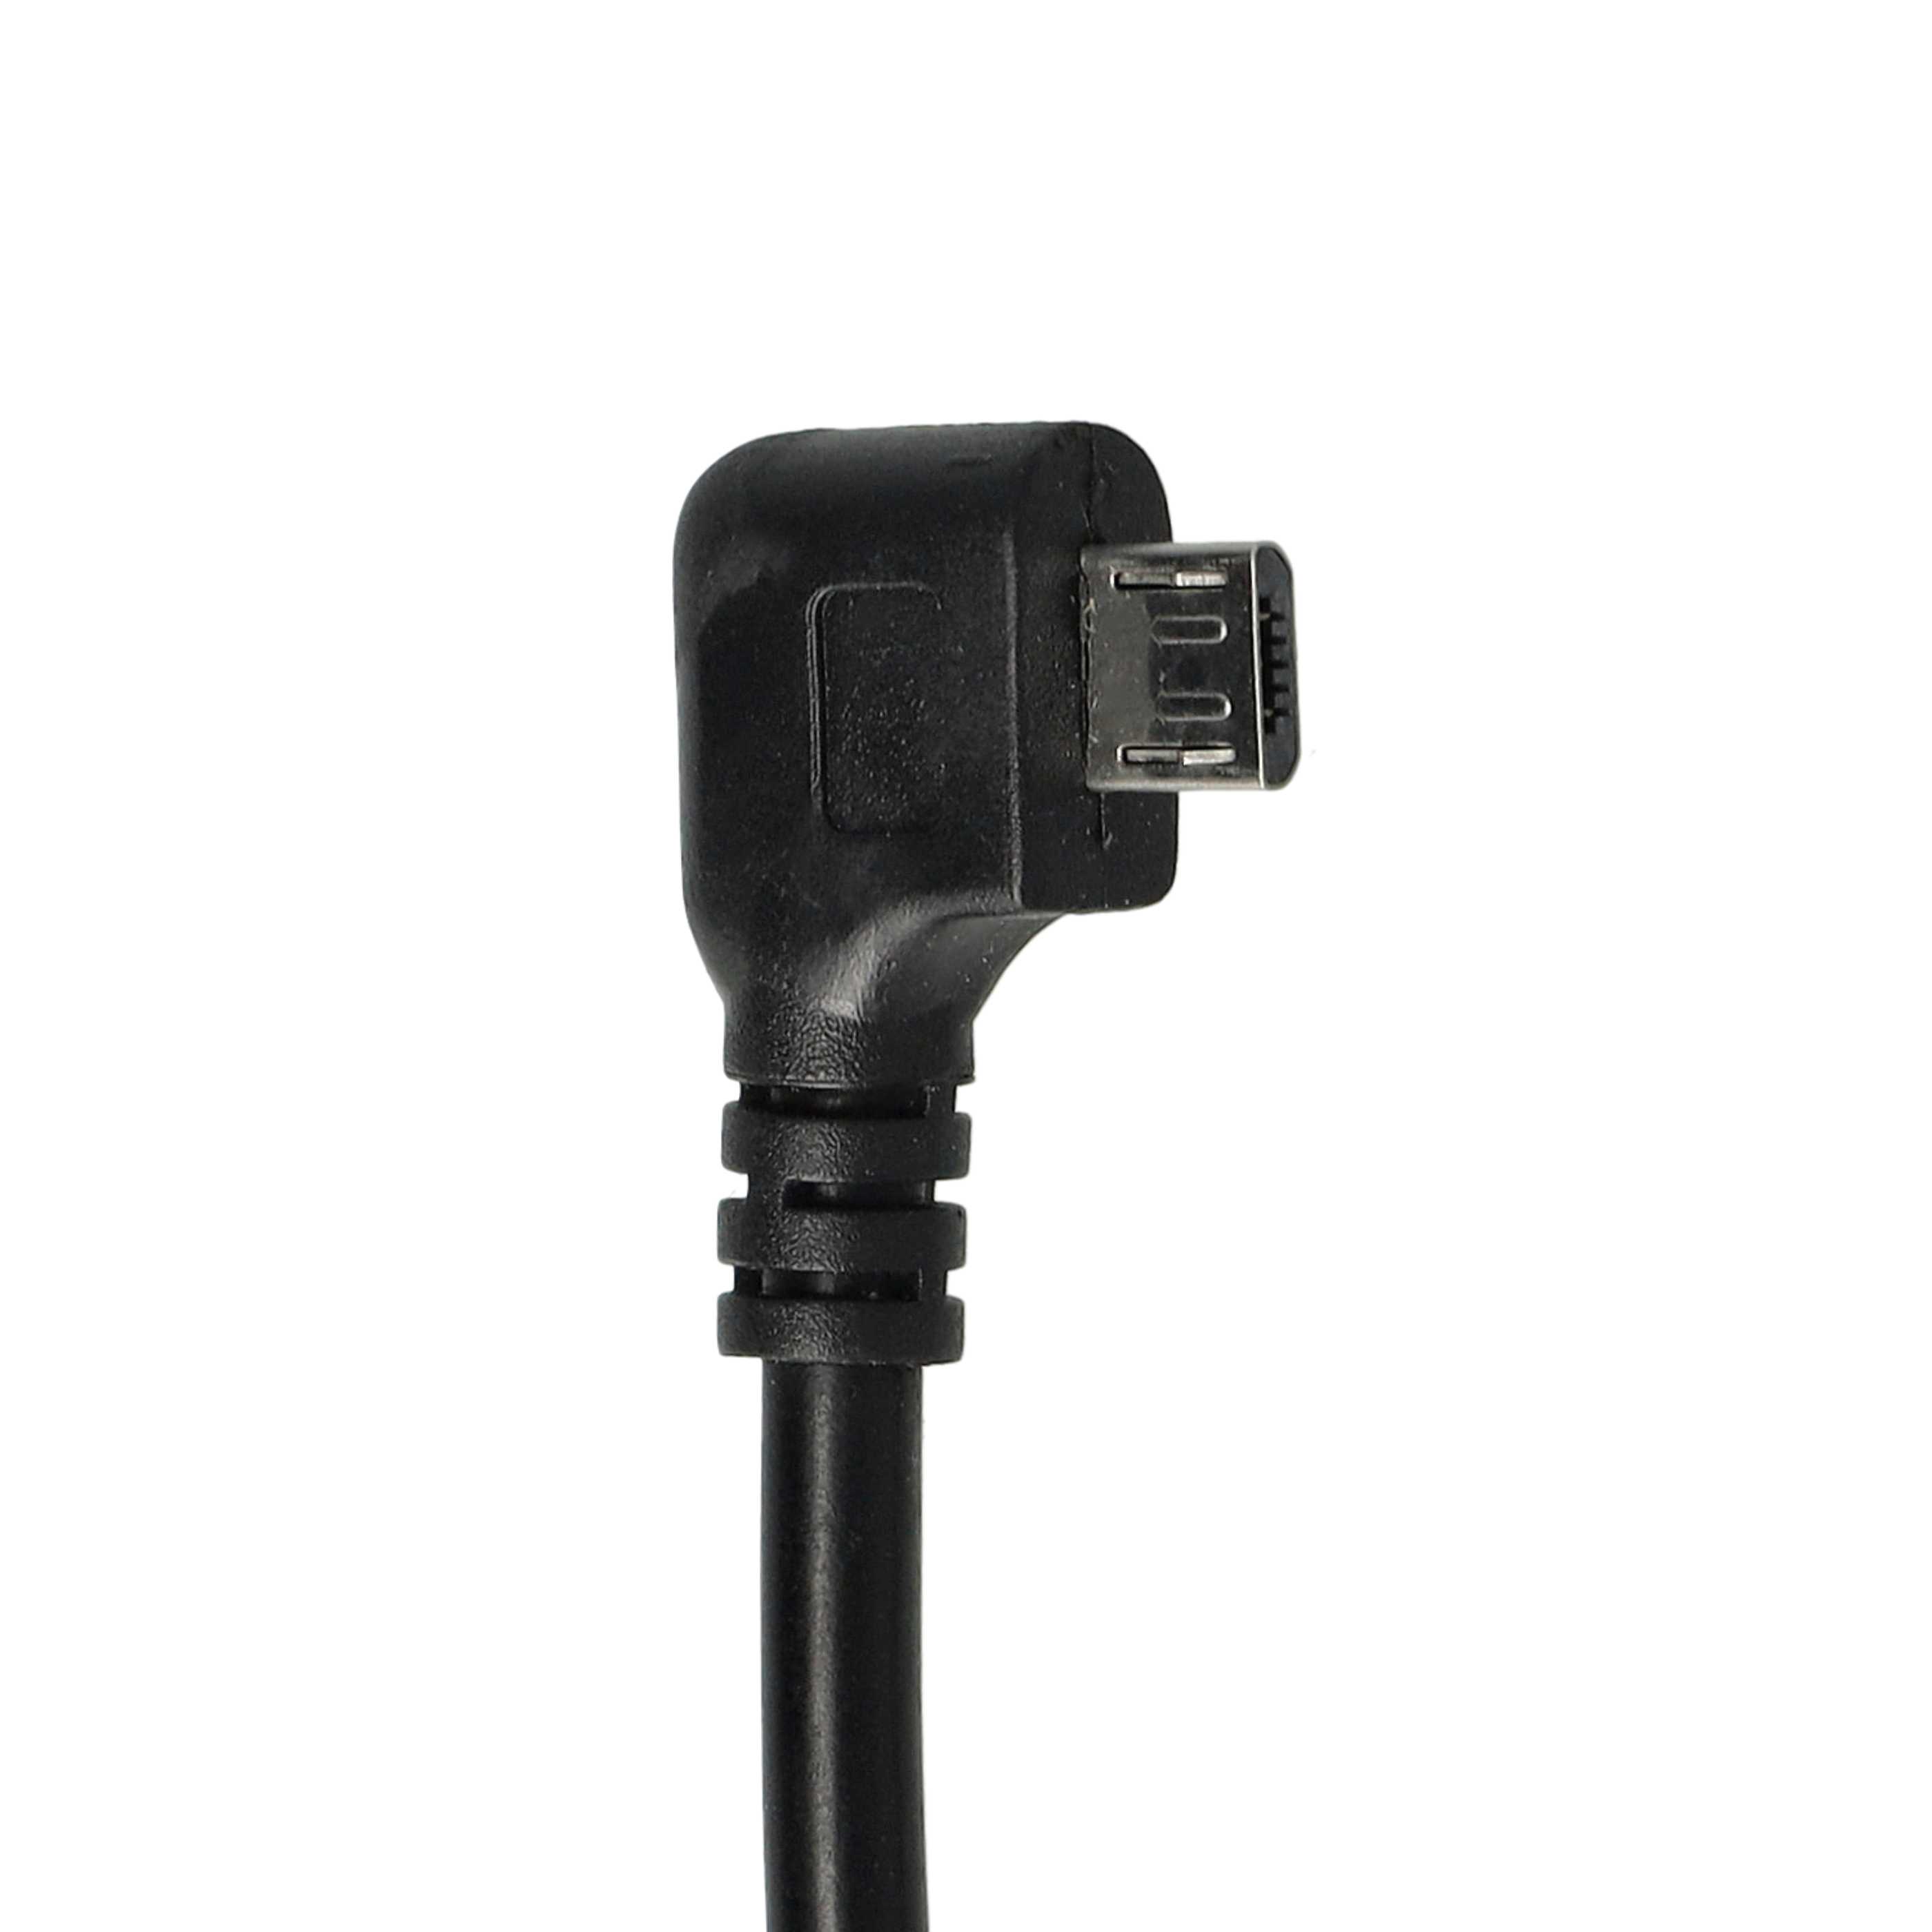 Adapter OTG Micro-USB to USB port (female) 90° angle for smartphone, tablet, netbook, laptop